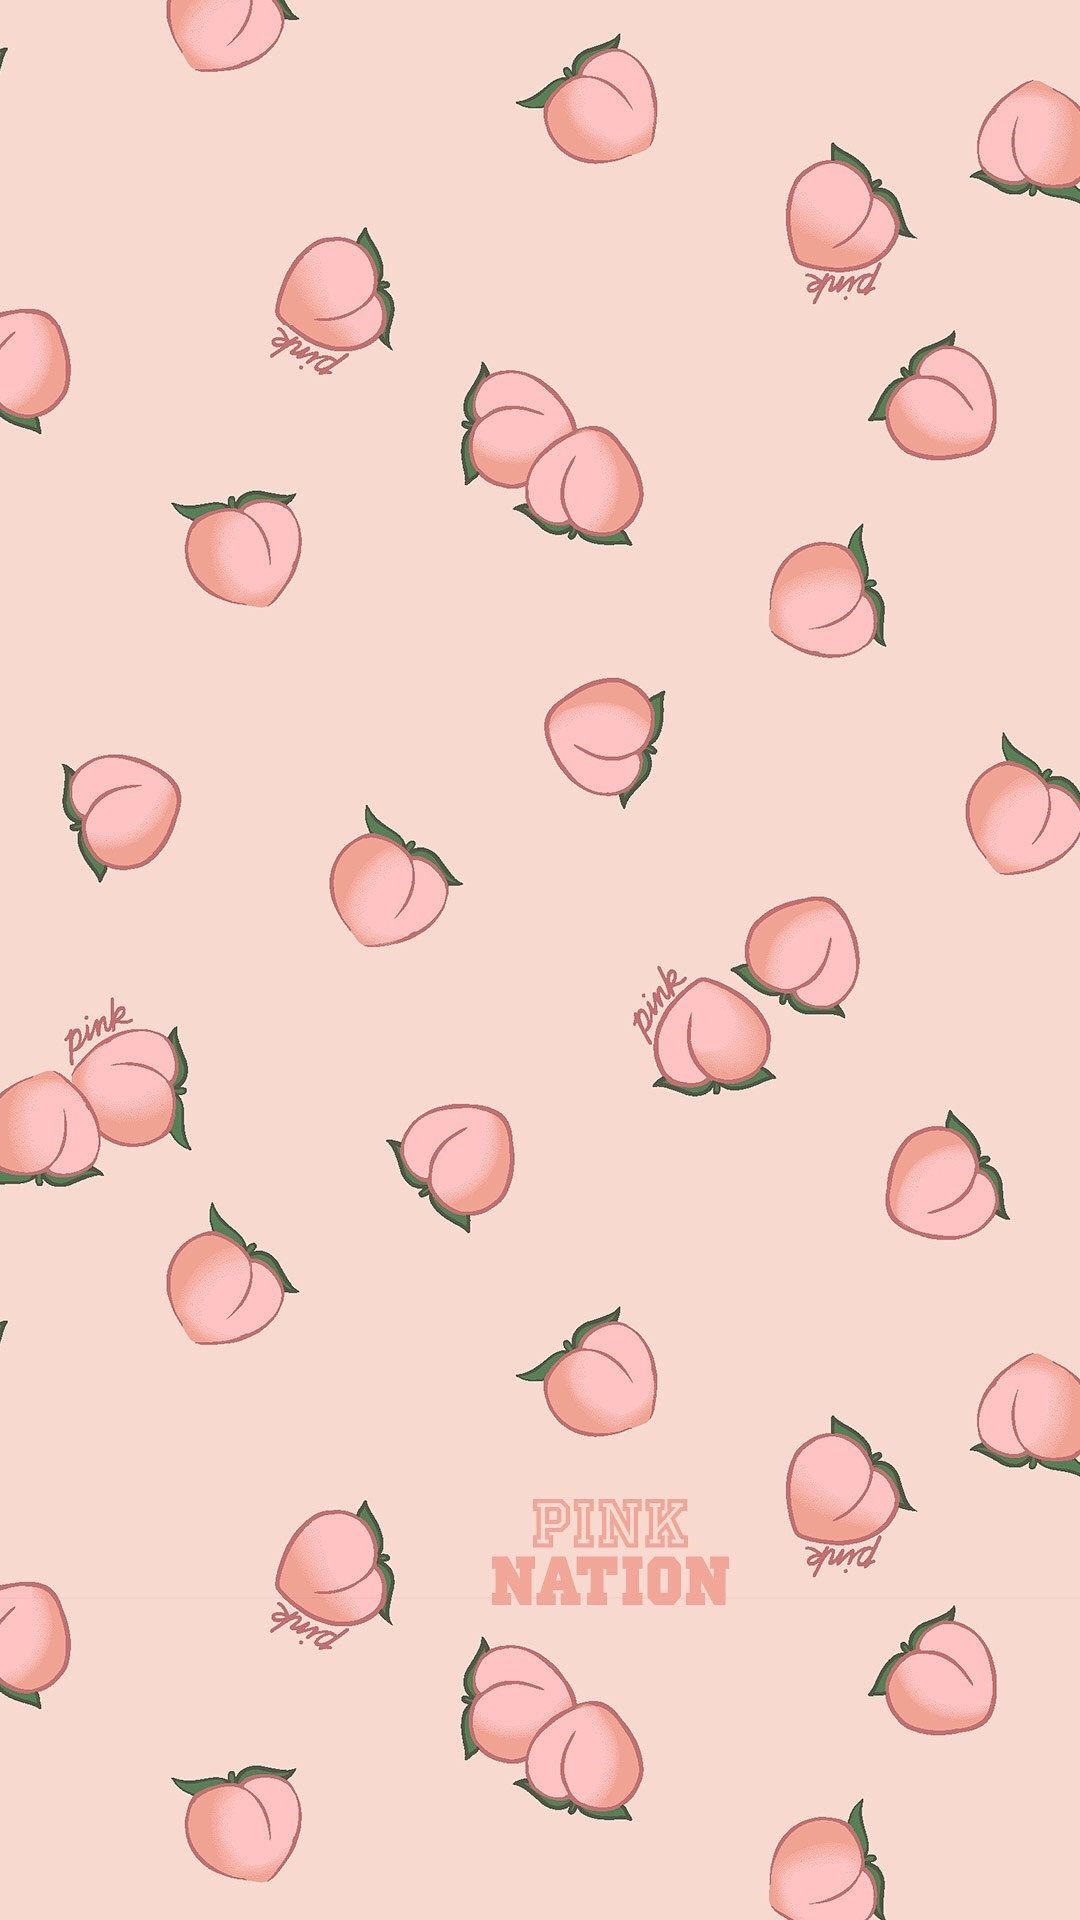 Aesthetic Cute iphone wallpaper high quality